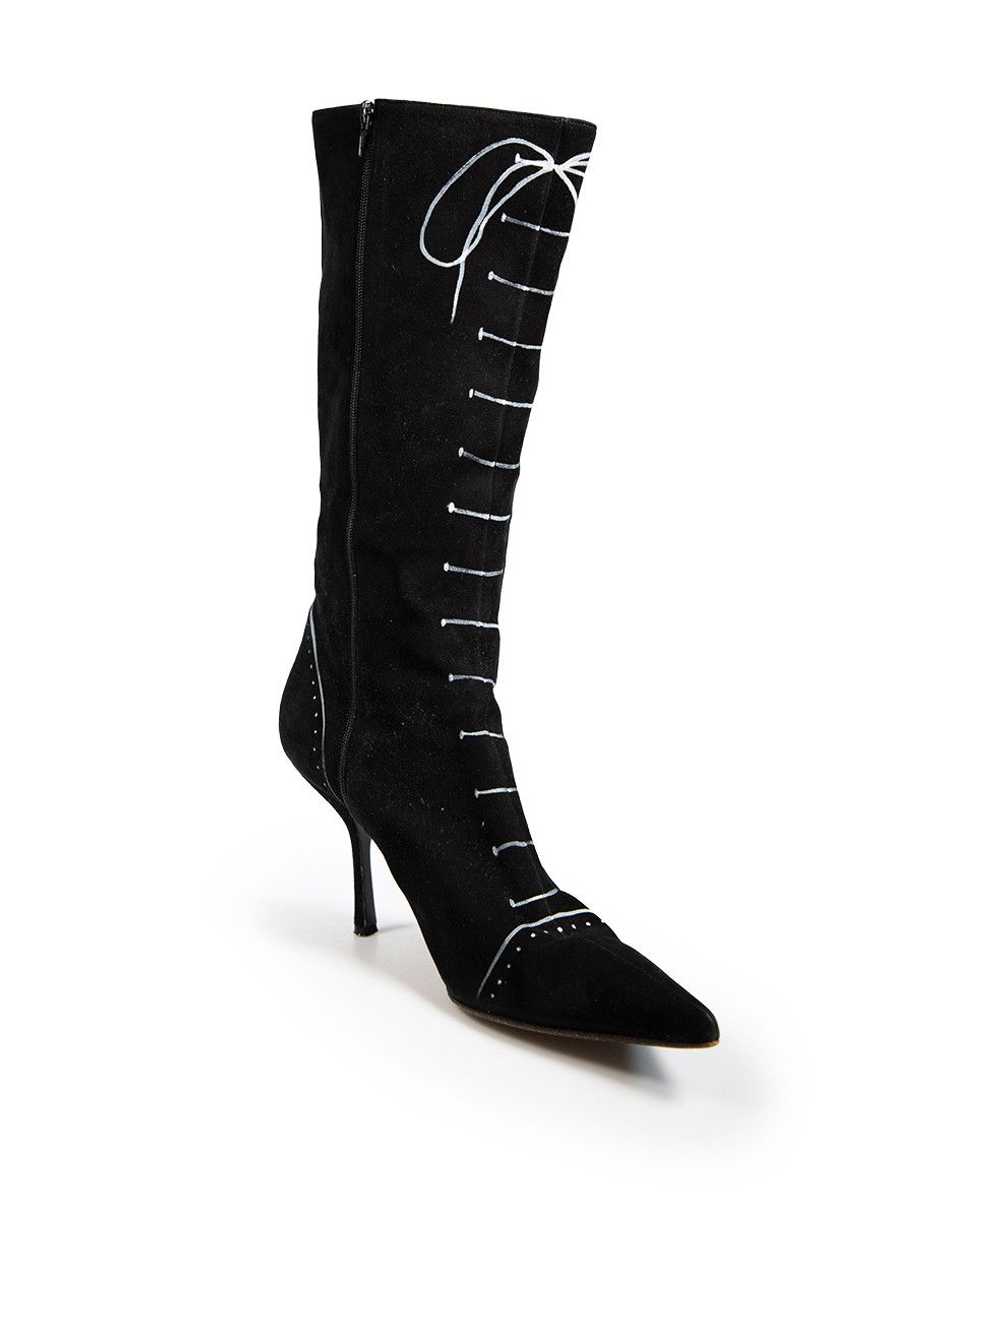 Moschino Black Suede Lace Print Boots - image 2